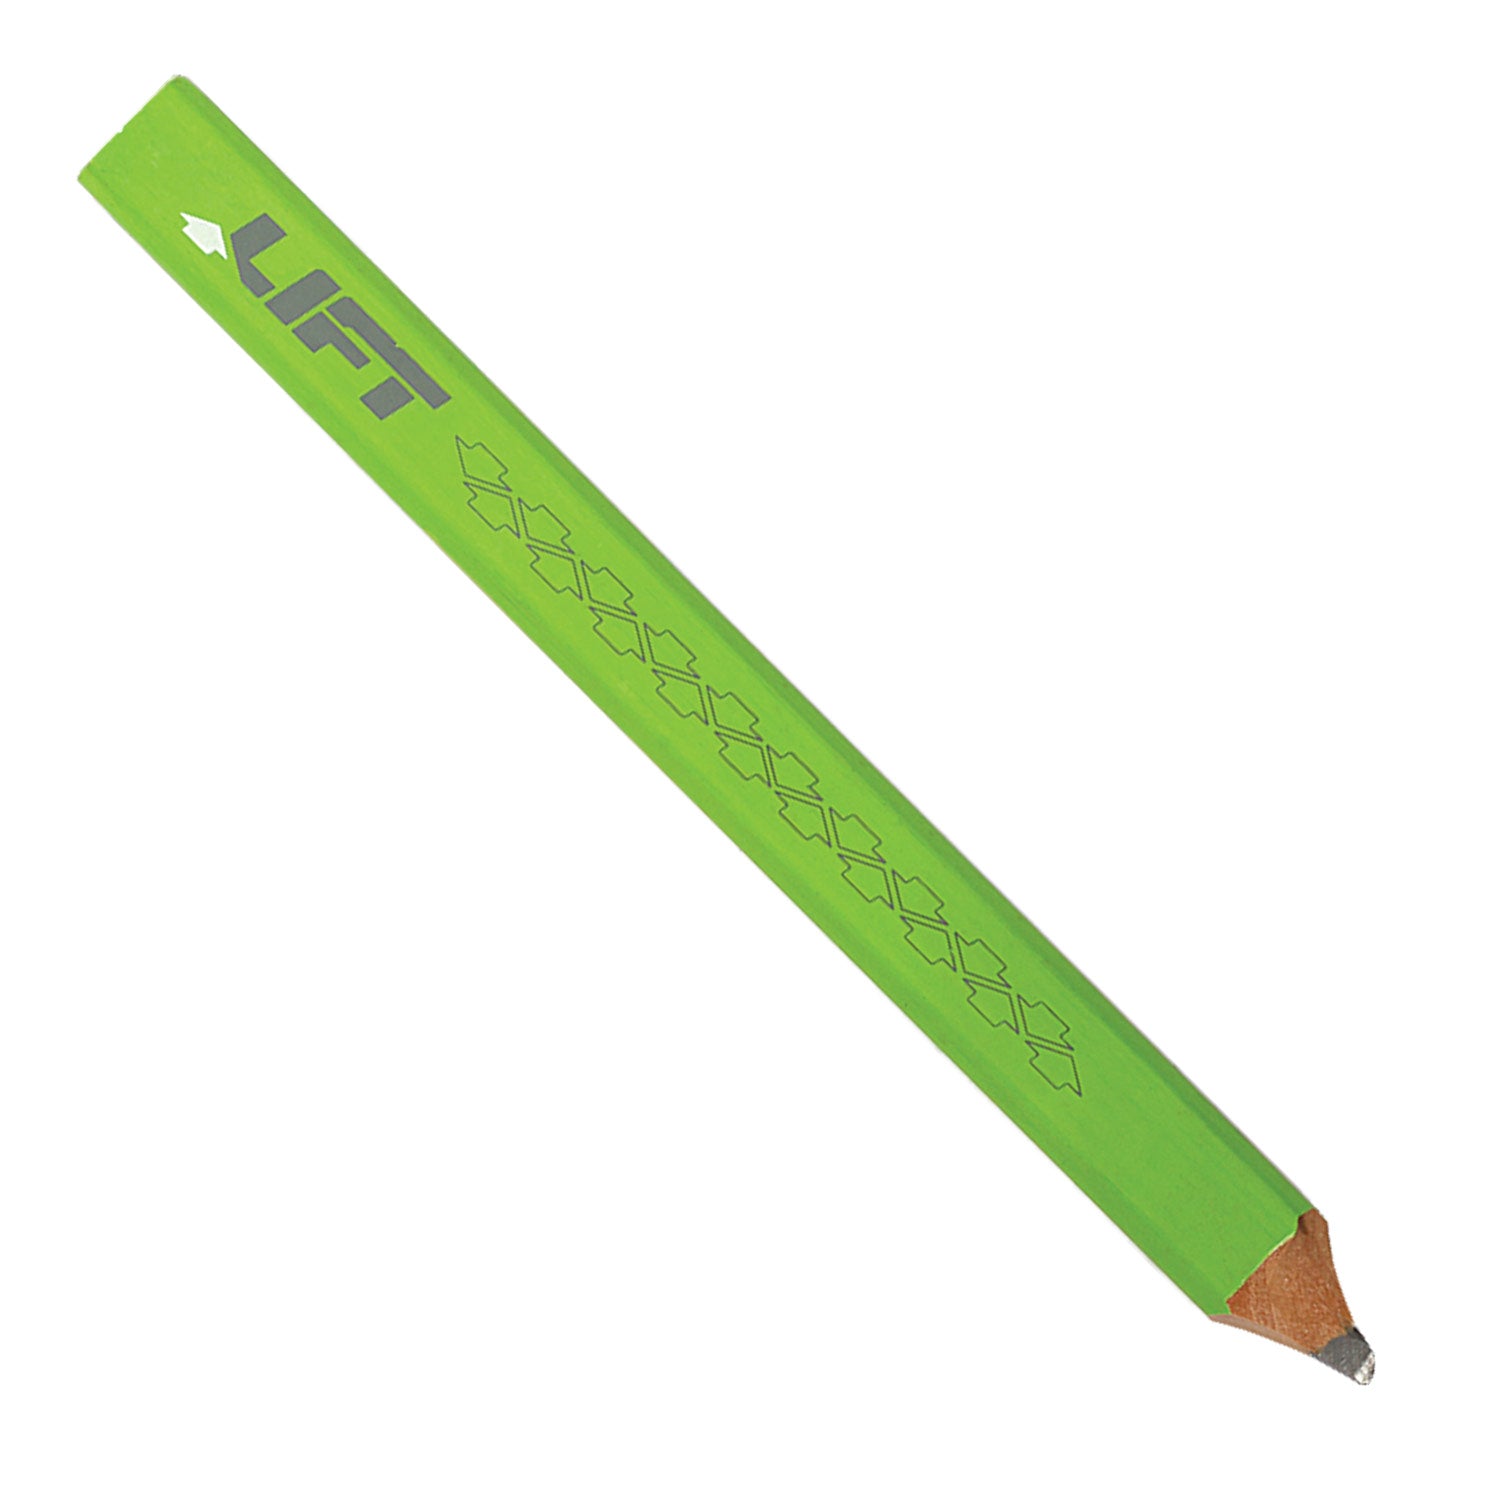 LIFT Safety - Carpenters Pencil